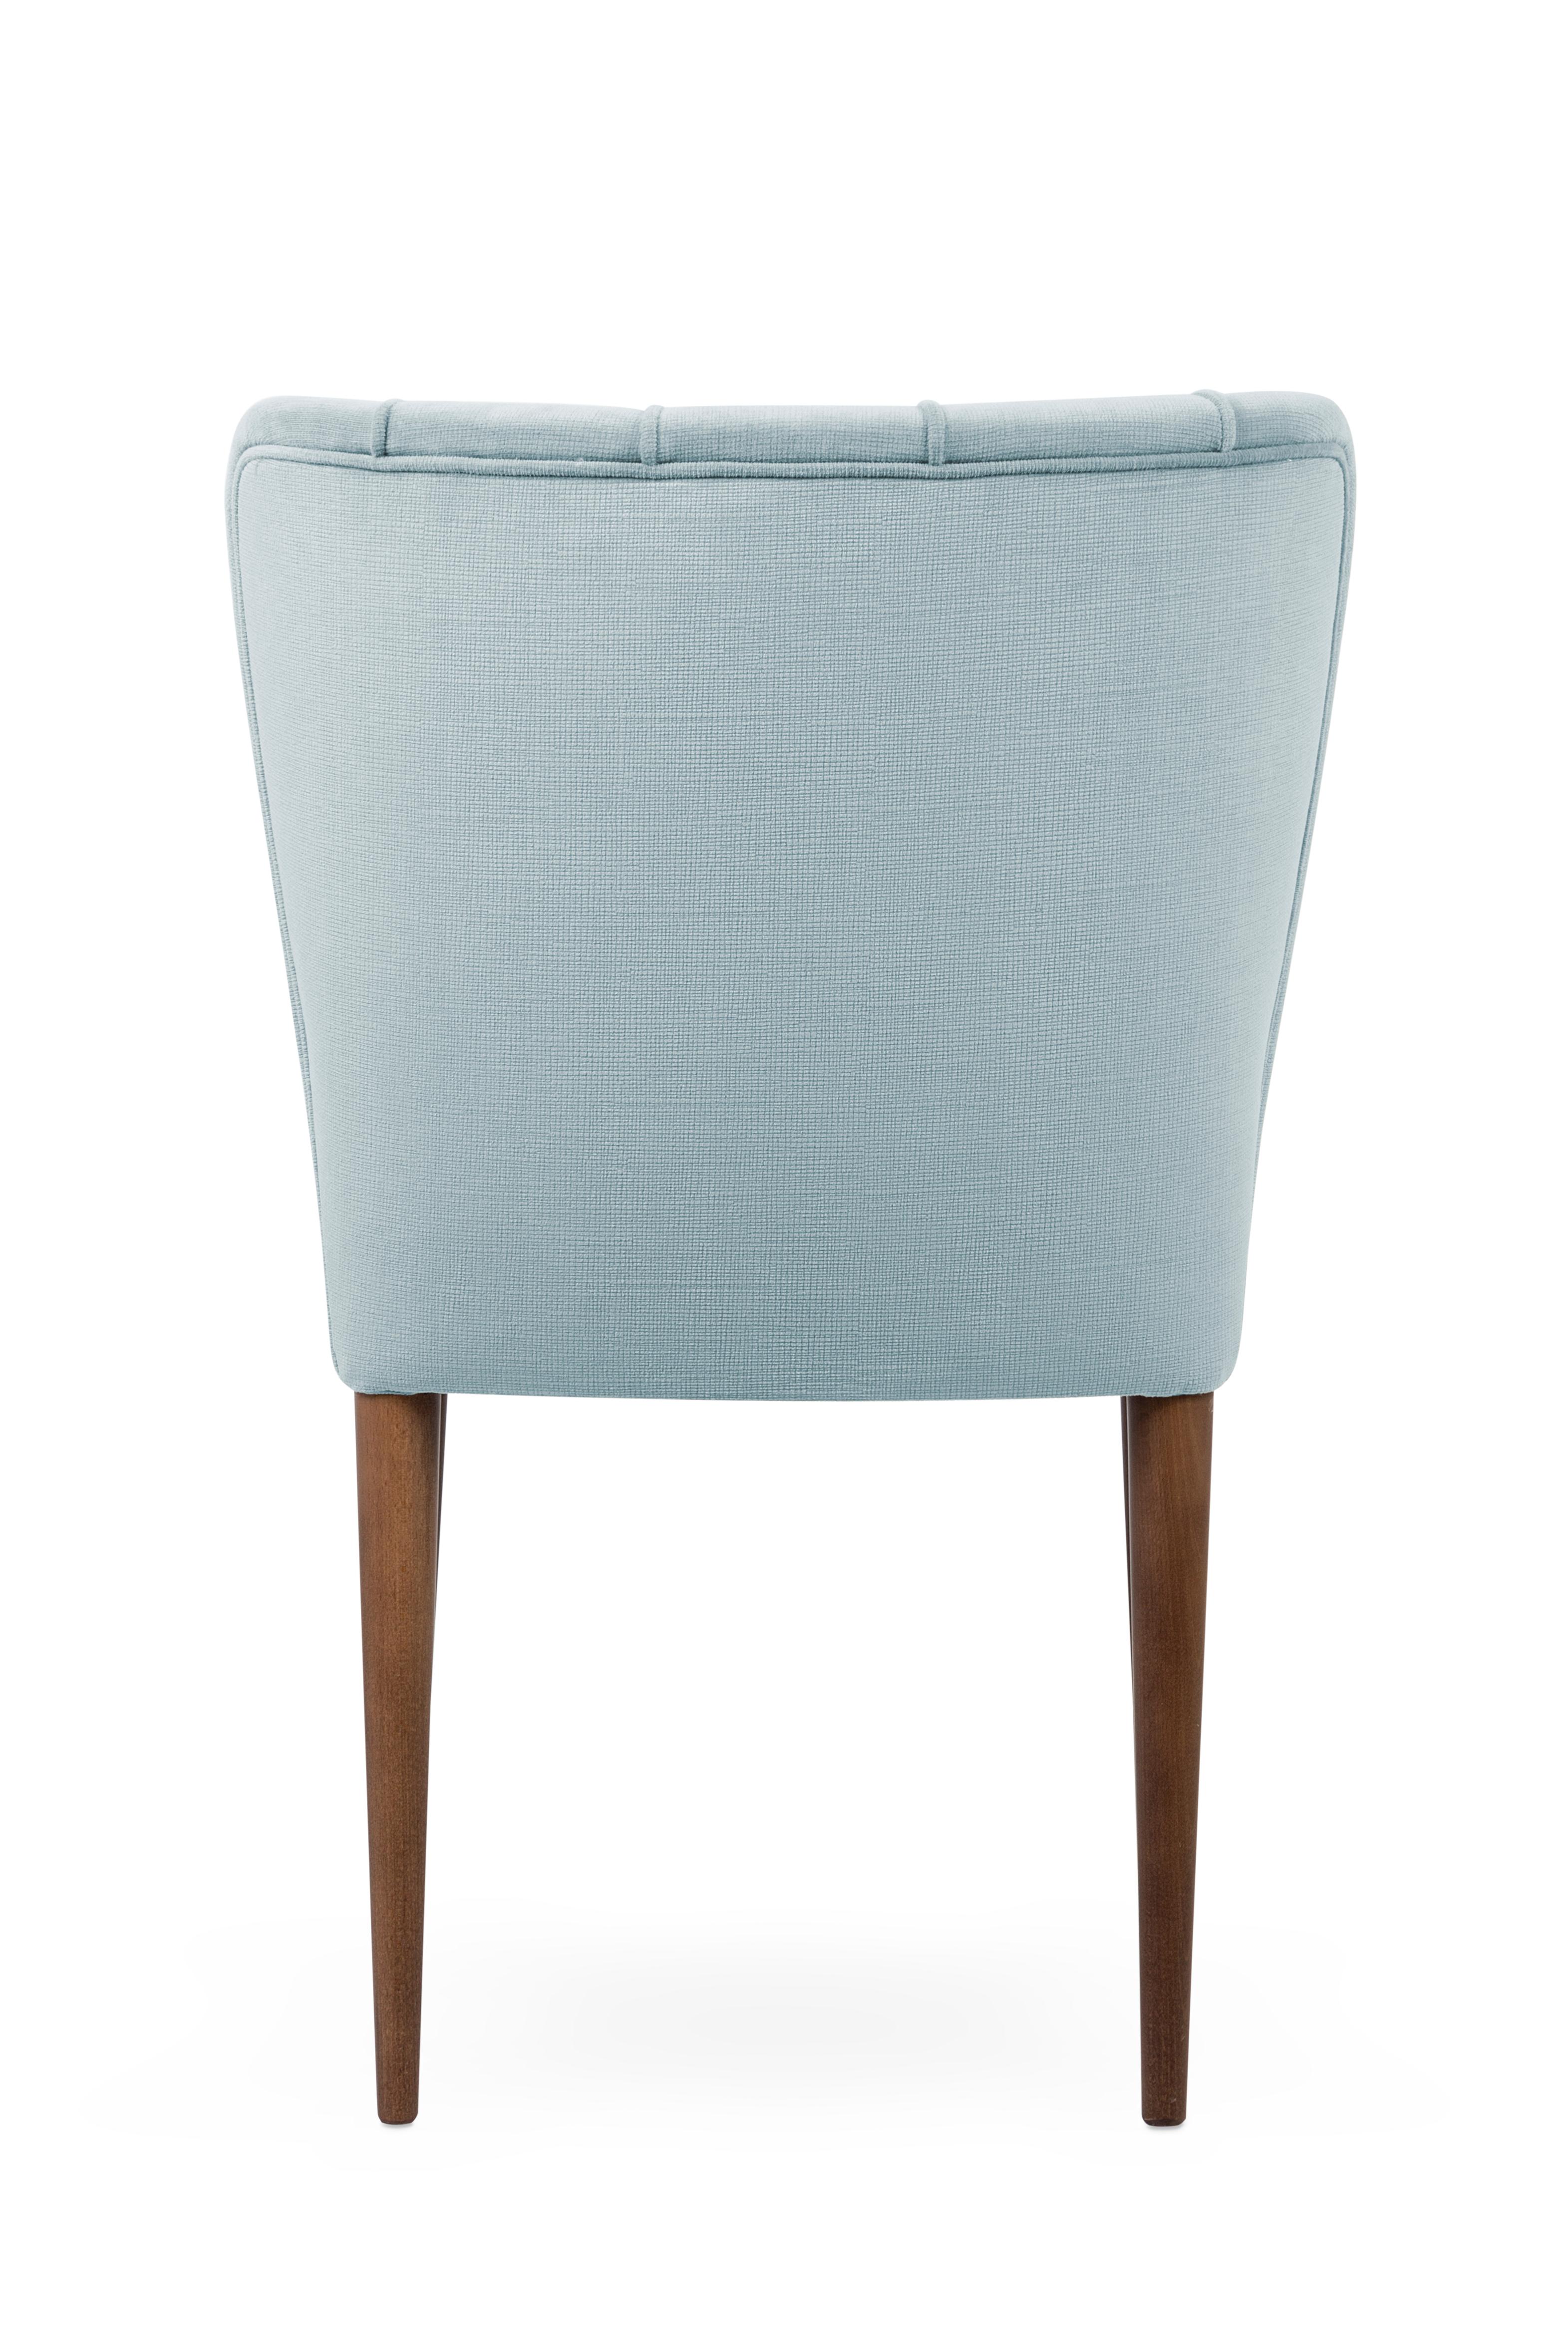 Hand-Crafted Agata Chair, Upholstered in Fabric, Solid Ash/Beech Feet with Stain Finish For Sale